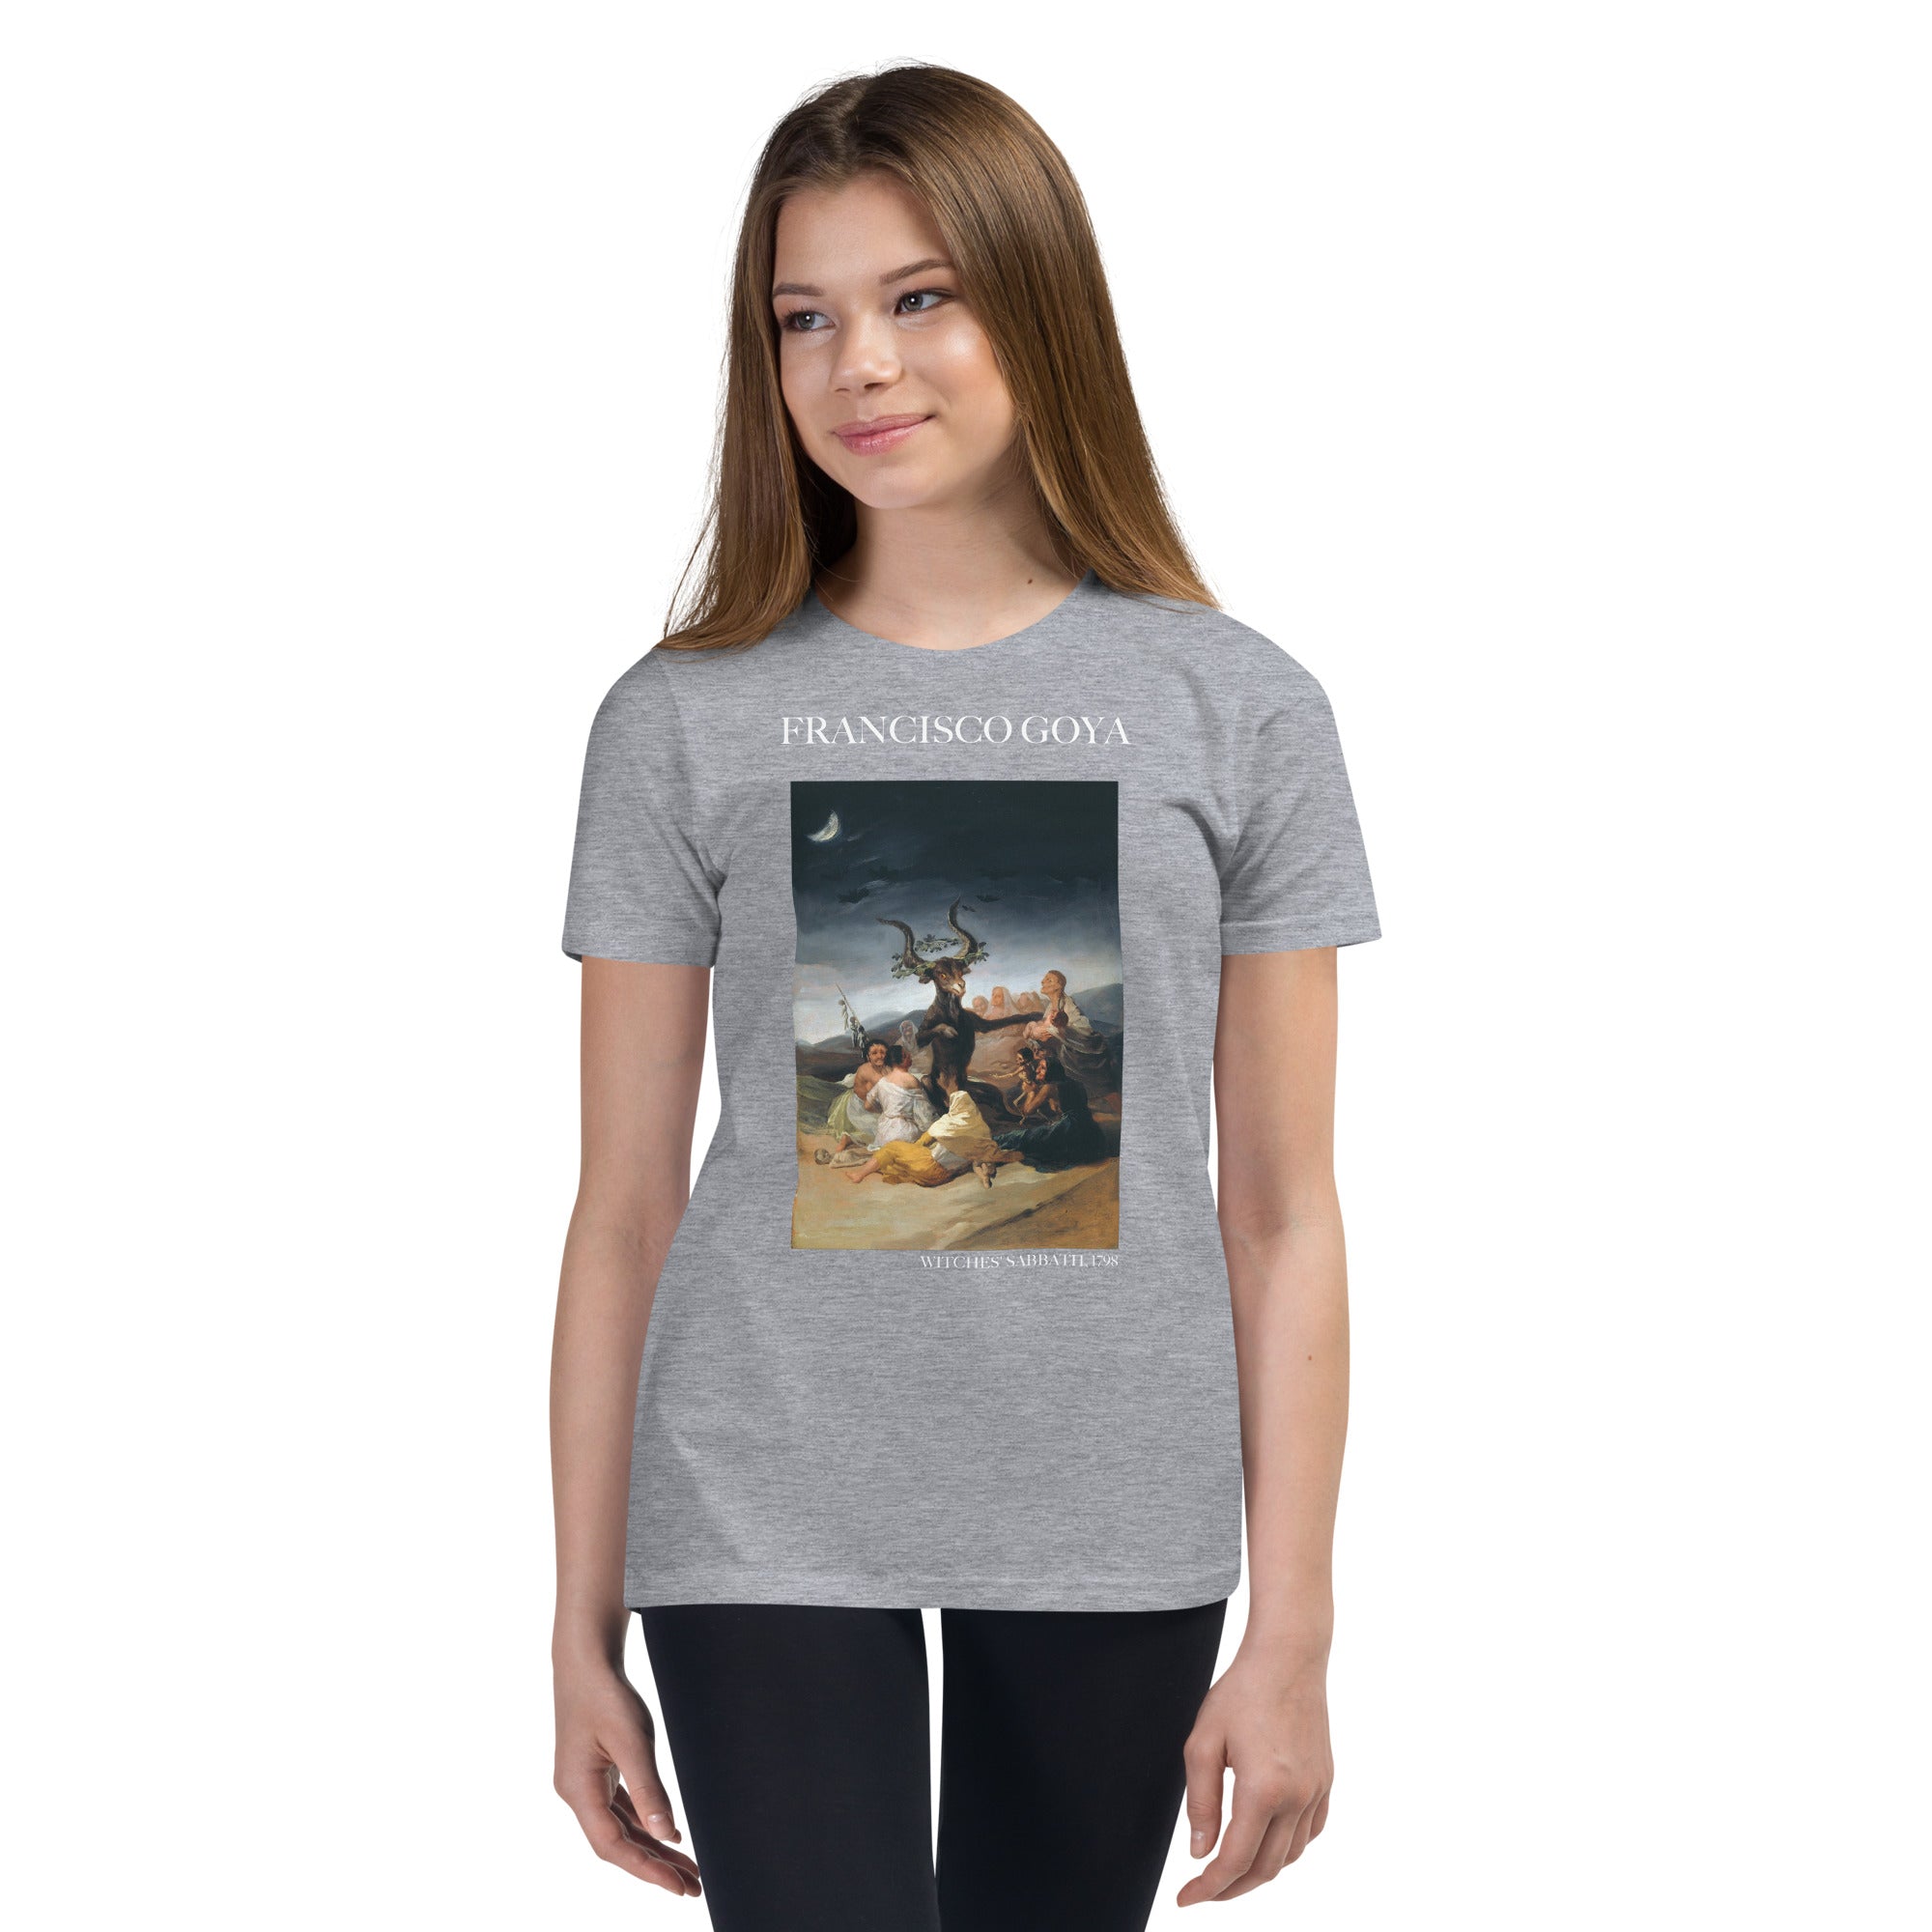 Francisco Goya 'Witches' Sabbath' Famous Painting Short Sleeve T-Shirt | Premium Youth Art Tee